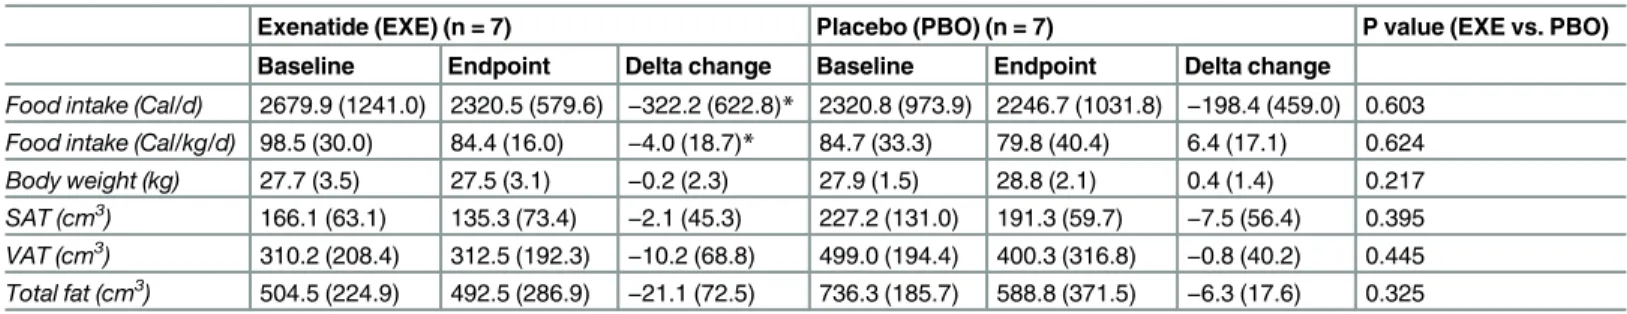 Table 3. Changes in food intake and body composition after exenatide treatment for 12 weeks in pre-diabetic canines.